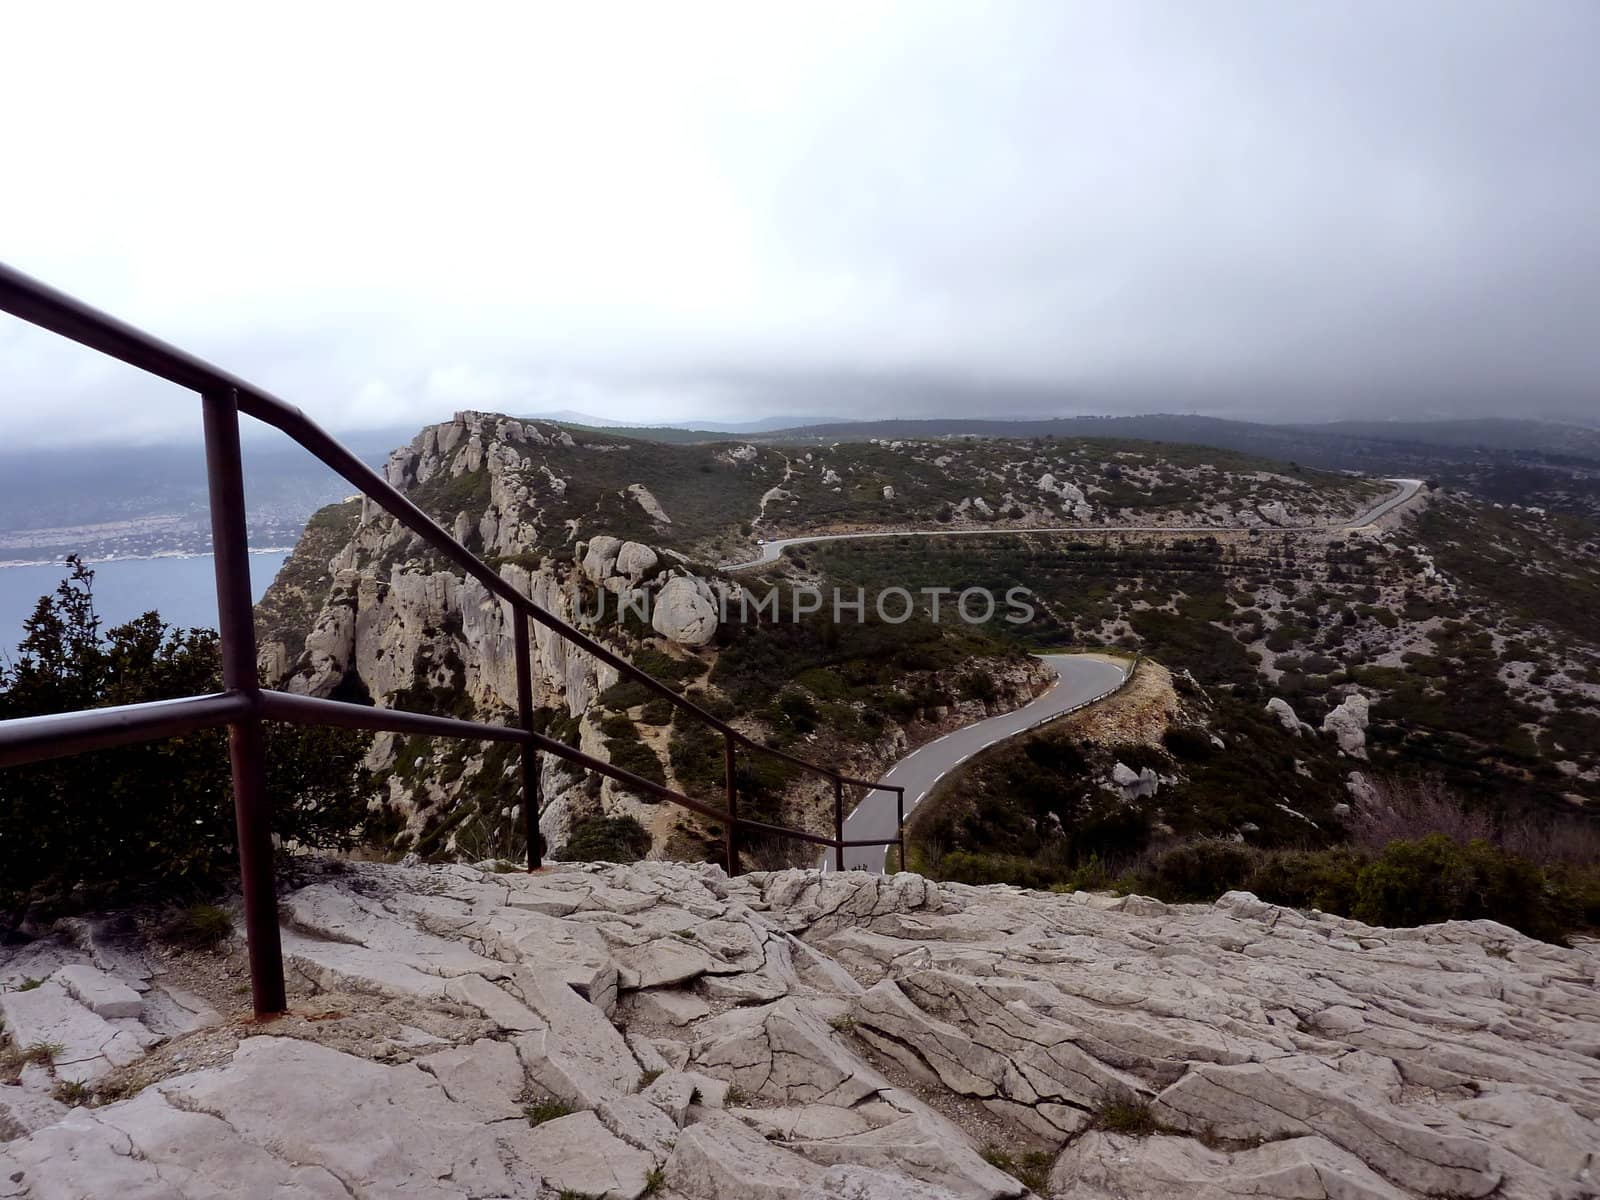 Winding road and metallic fence in a rocky mountain by cloudy weather